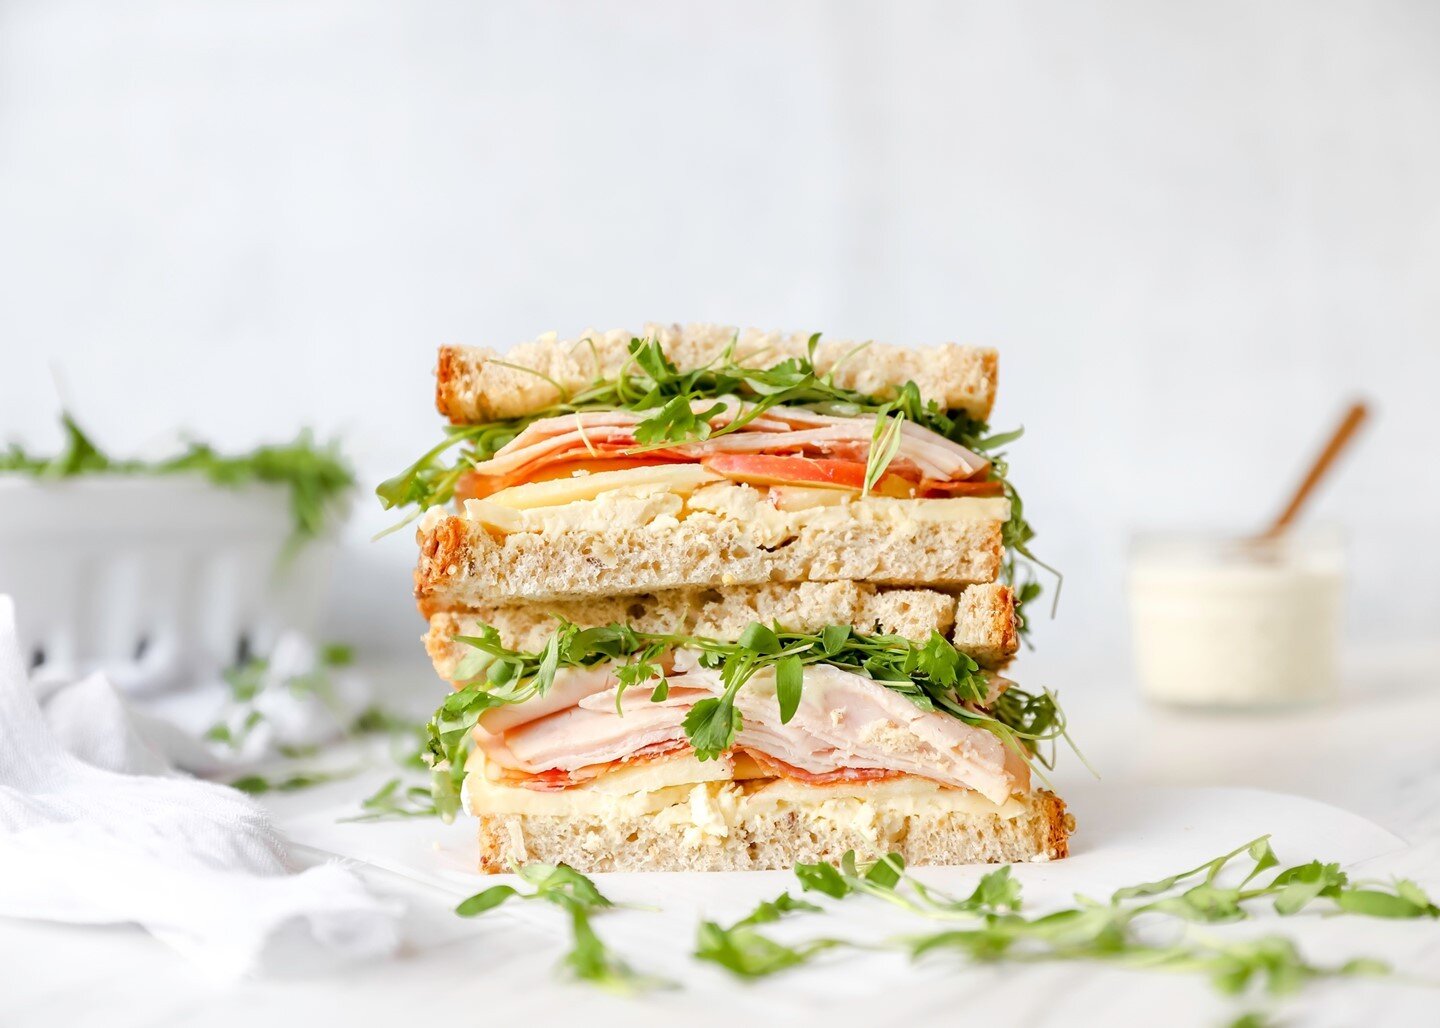 Who else is ready for the long weekend?! I'll be beaching it up this week and I'll be packing my beach sandwich along with all the things! This sandwich is so simple and so good! The triple cream and garlic honey spread make it extra special!  Here's